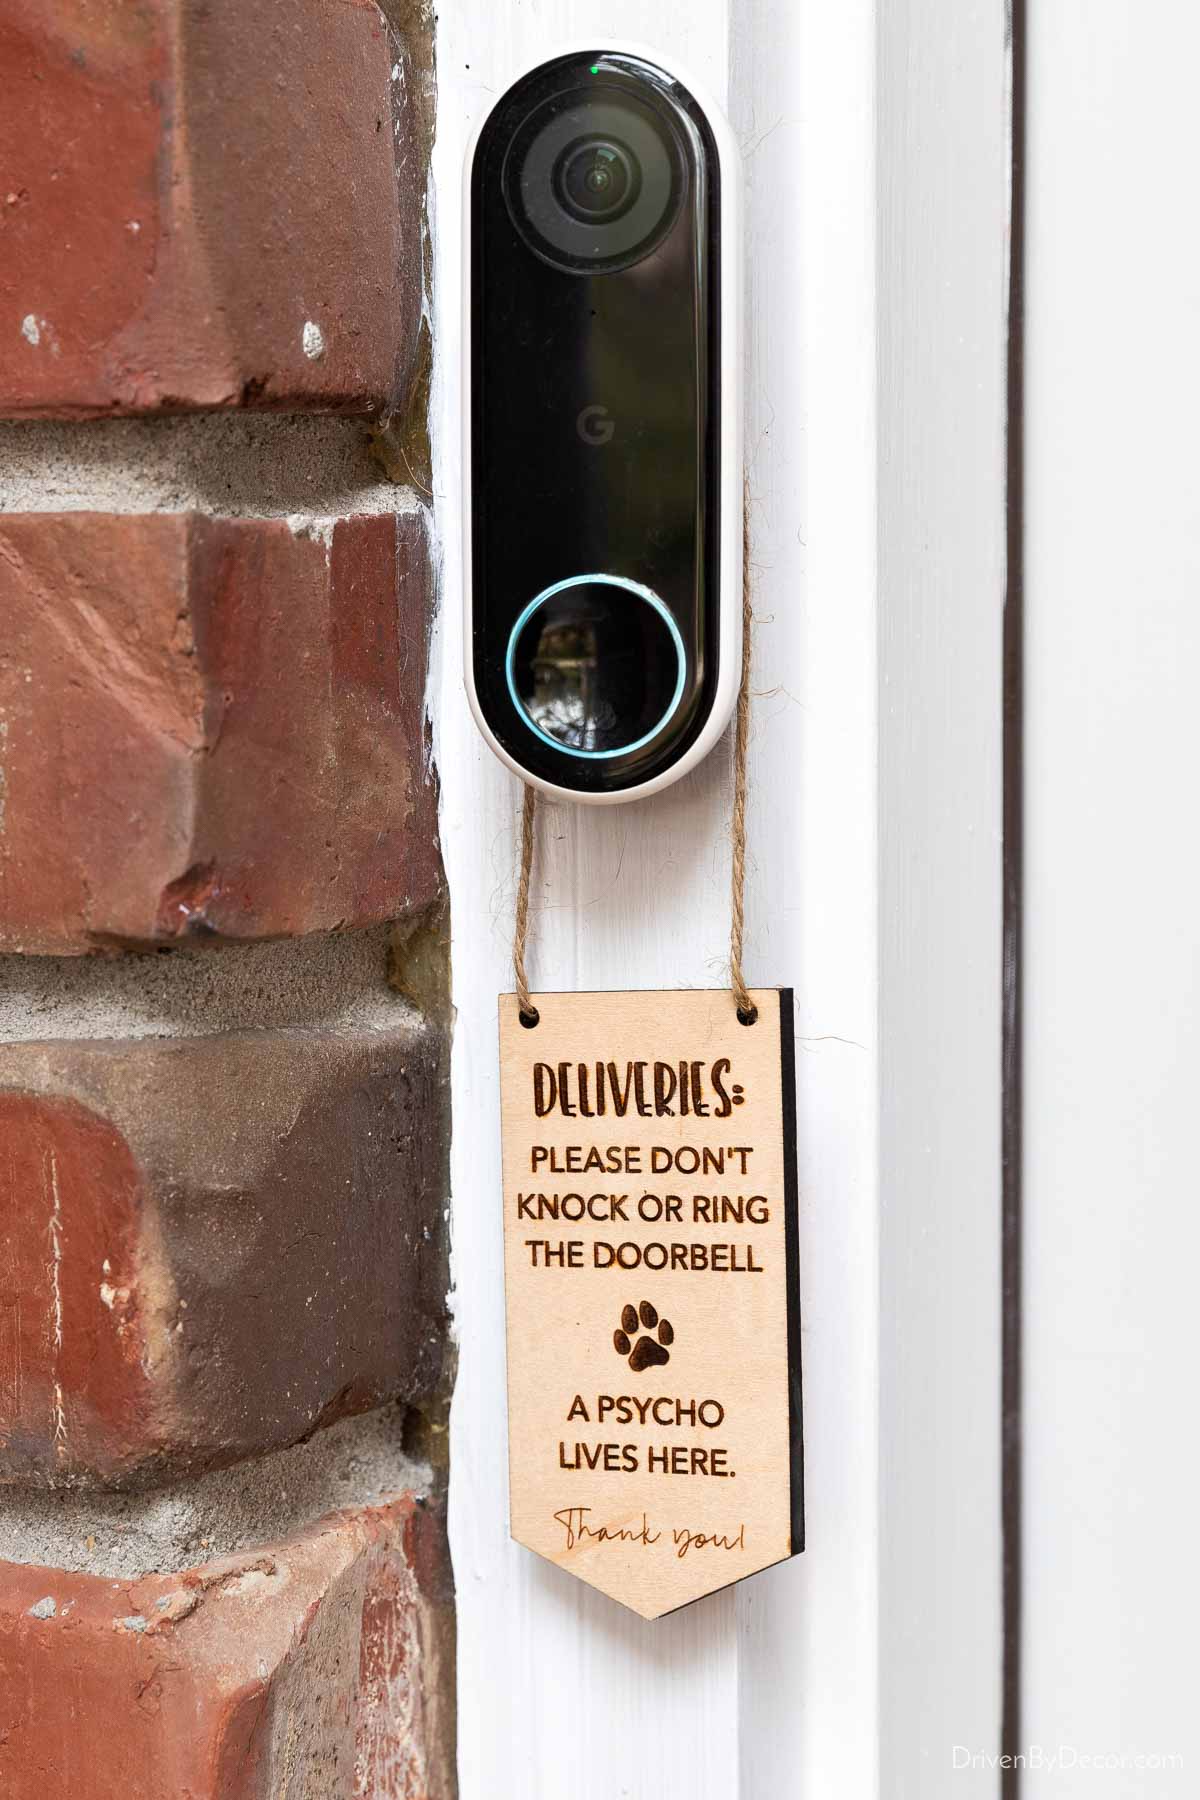 Wood doorbell sign saying not to ring doorbell for deliveries